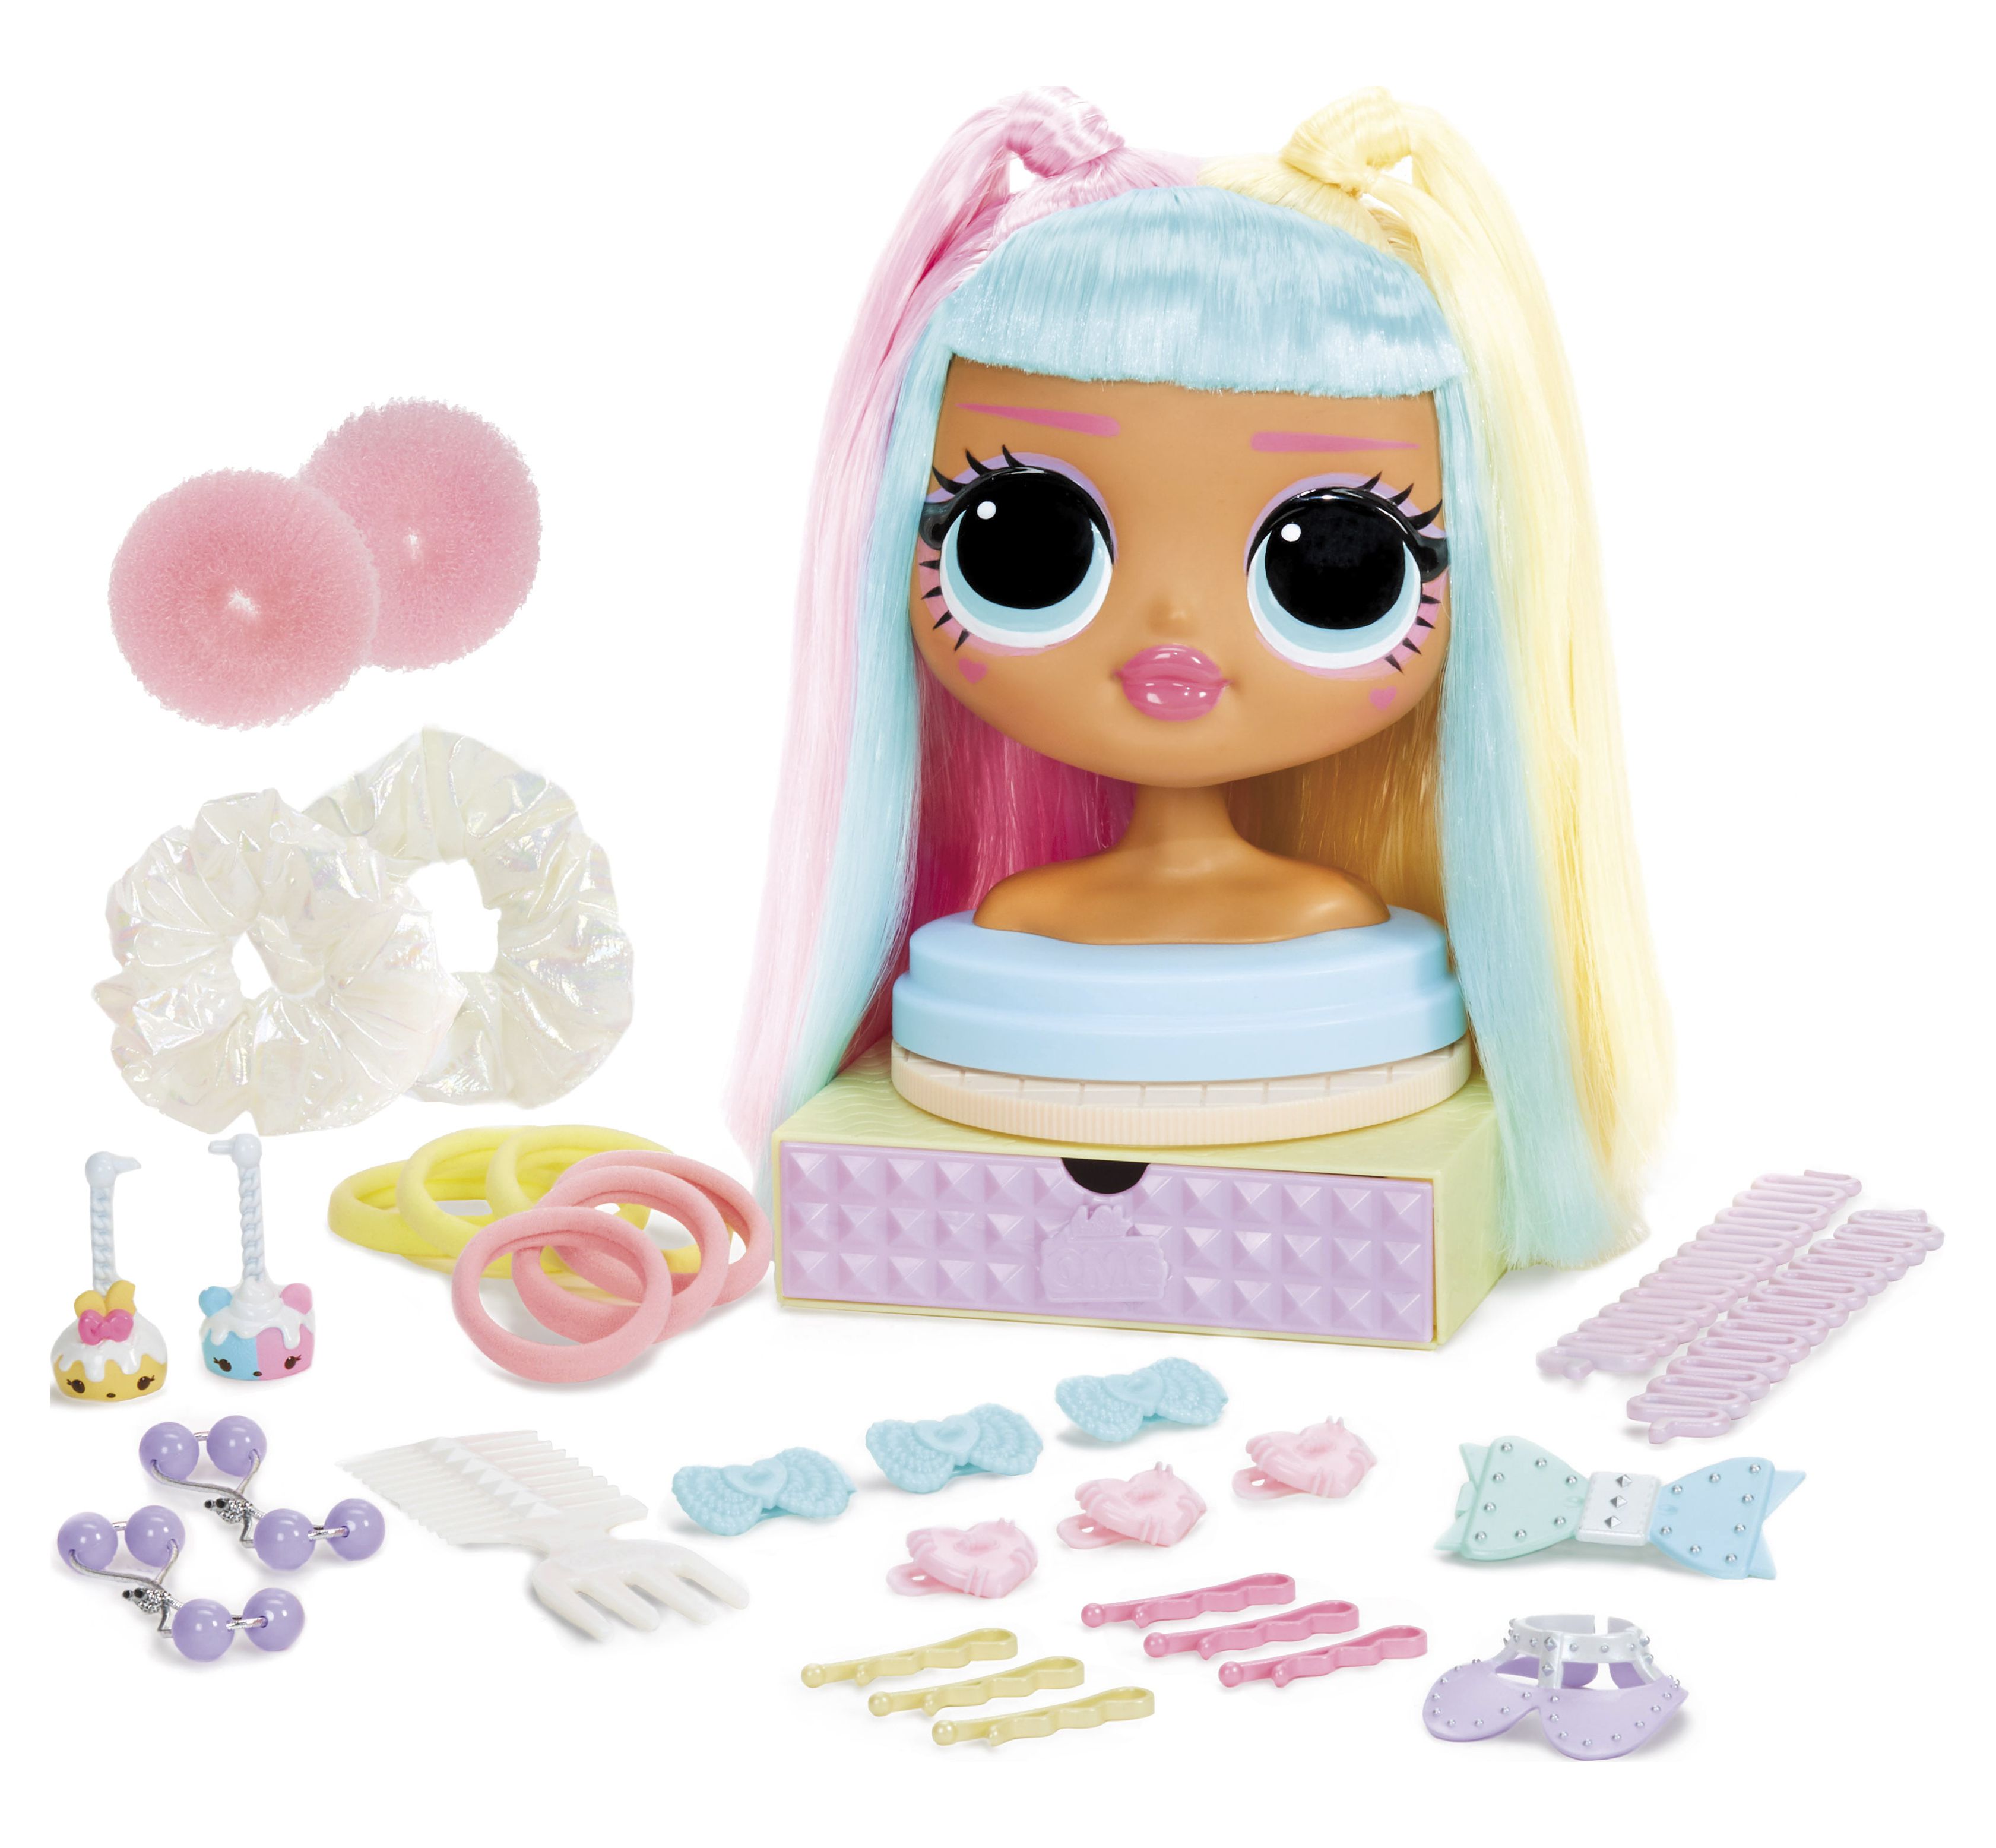 LOL Surprise Omg Styling Doll Head Candylicious With 30 Surprises Girls Hair Play Toy - image 3 of 7